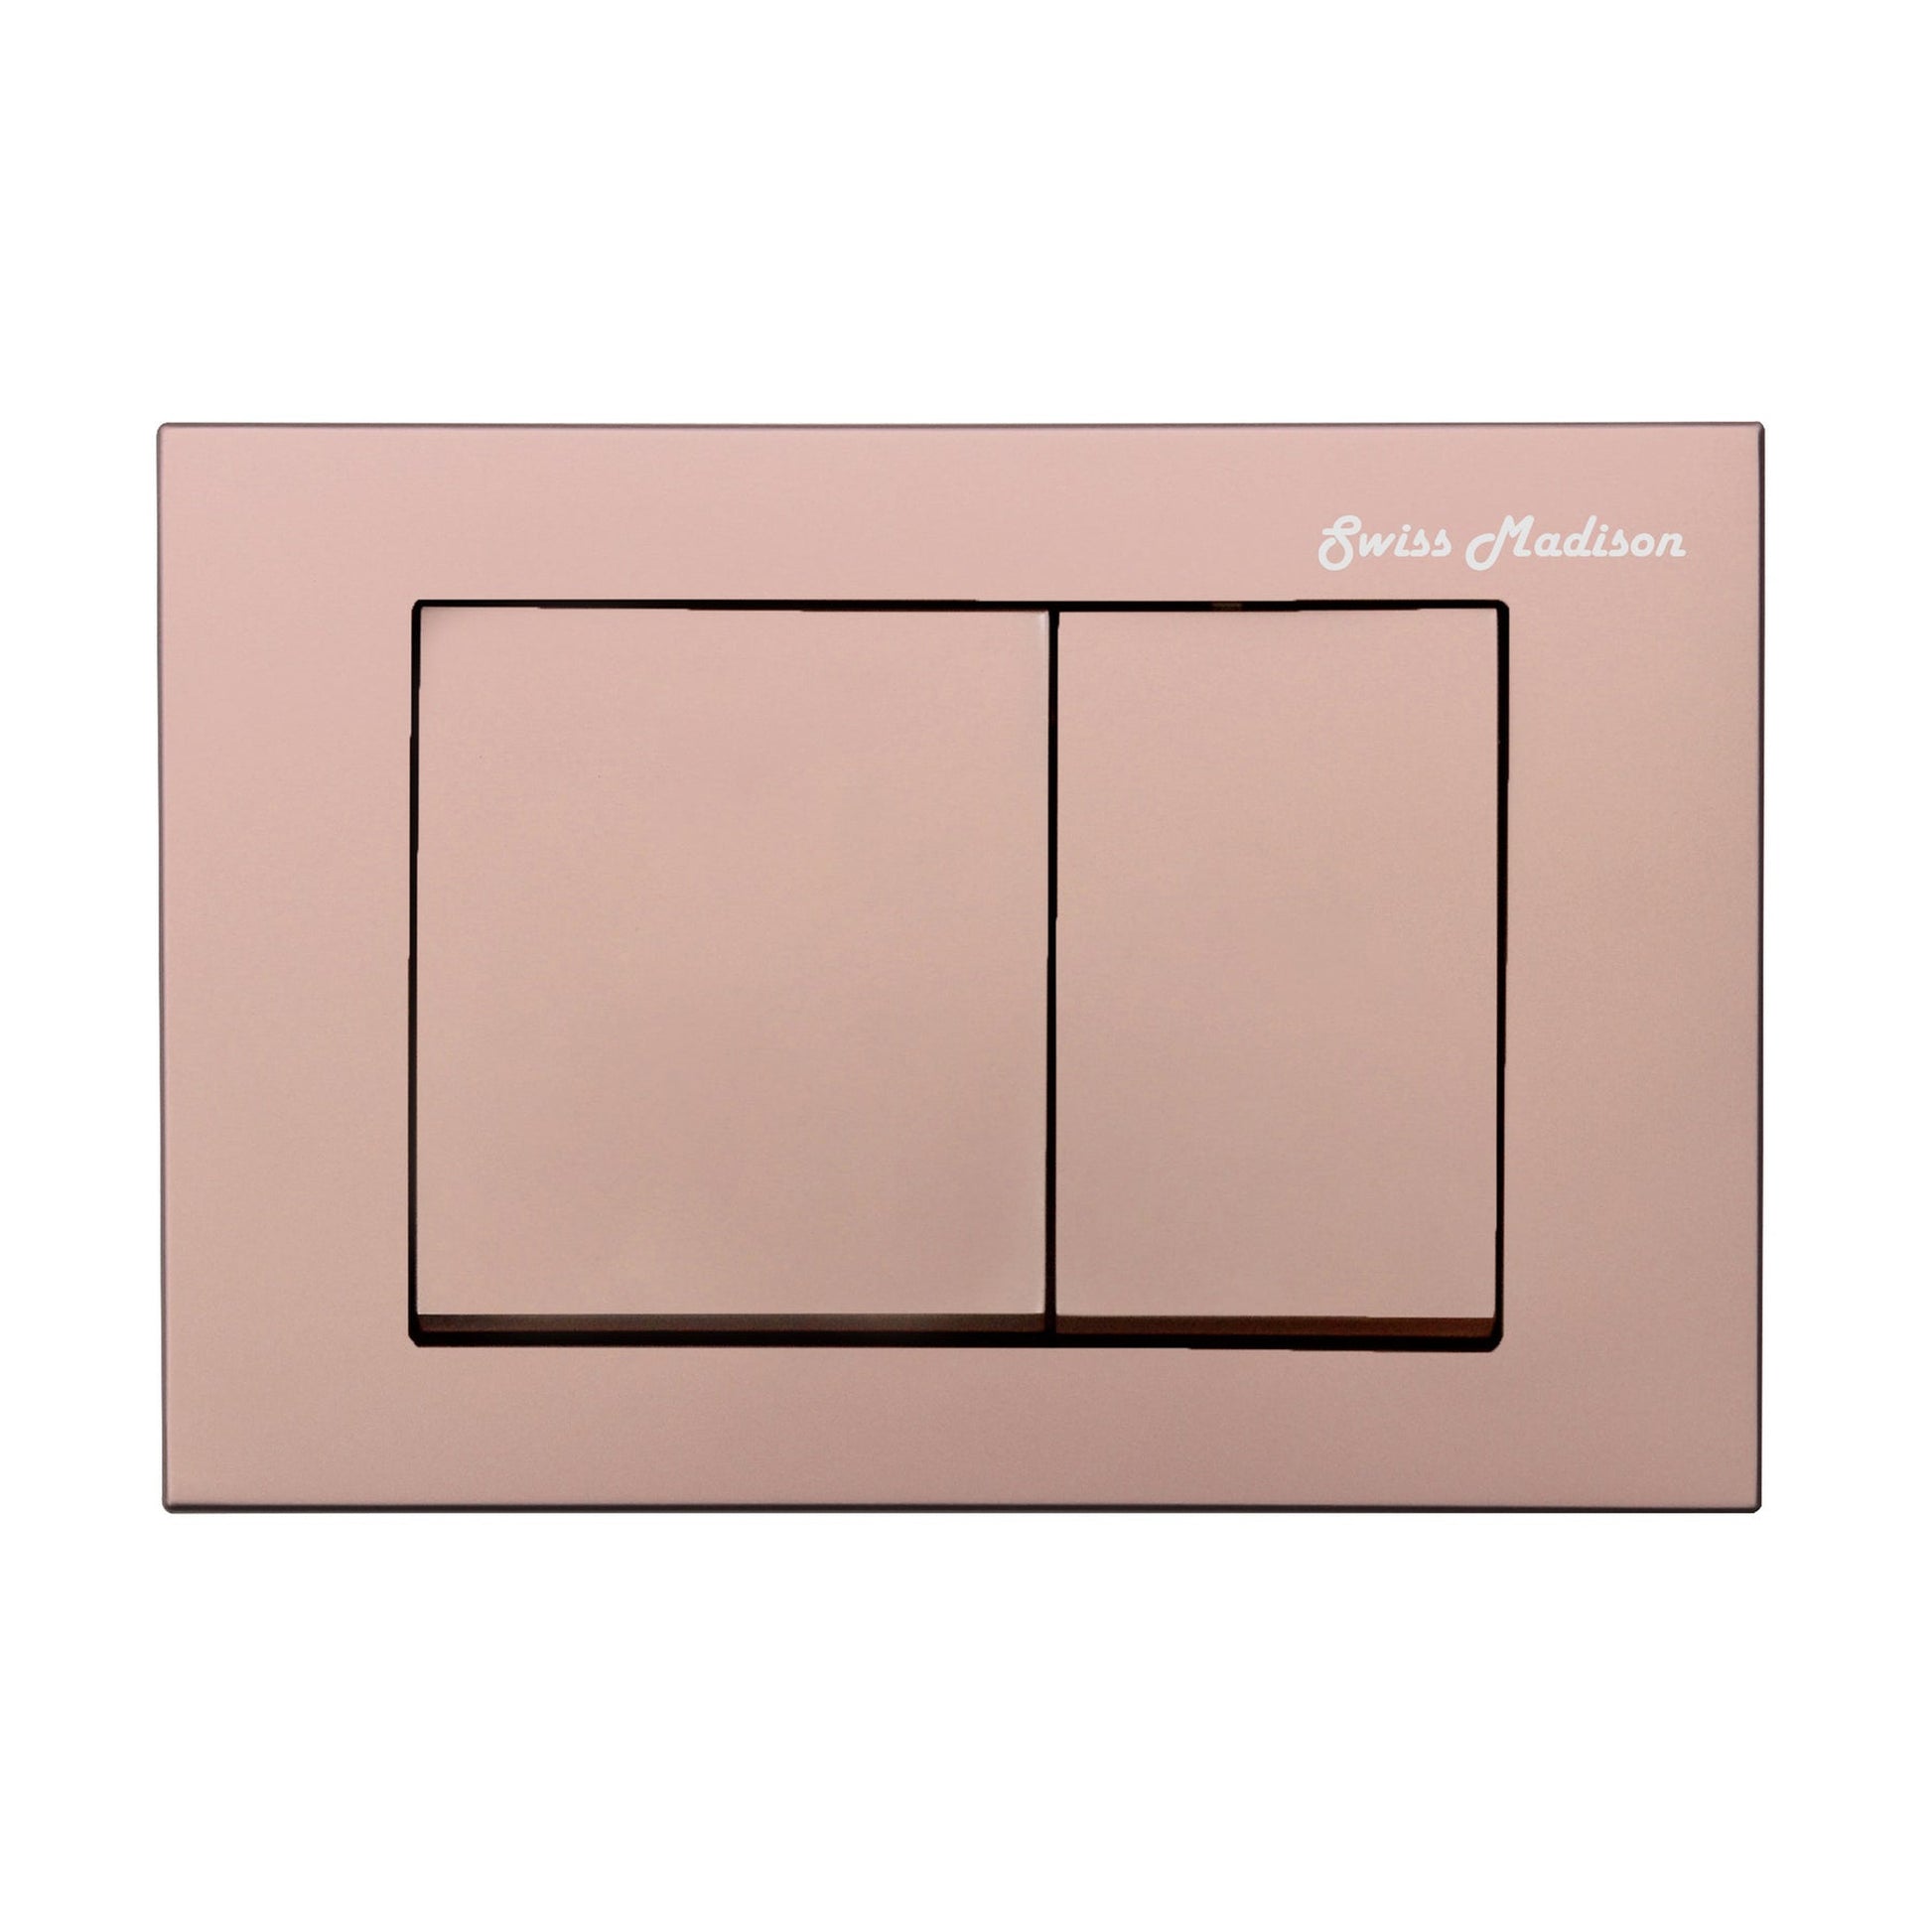 Swiss Madison 10" Rose Gold Wall-Mounted Actuator Flush Push Button Plate With Dual Flush System and Square Buttons